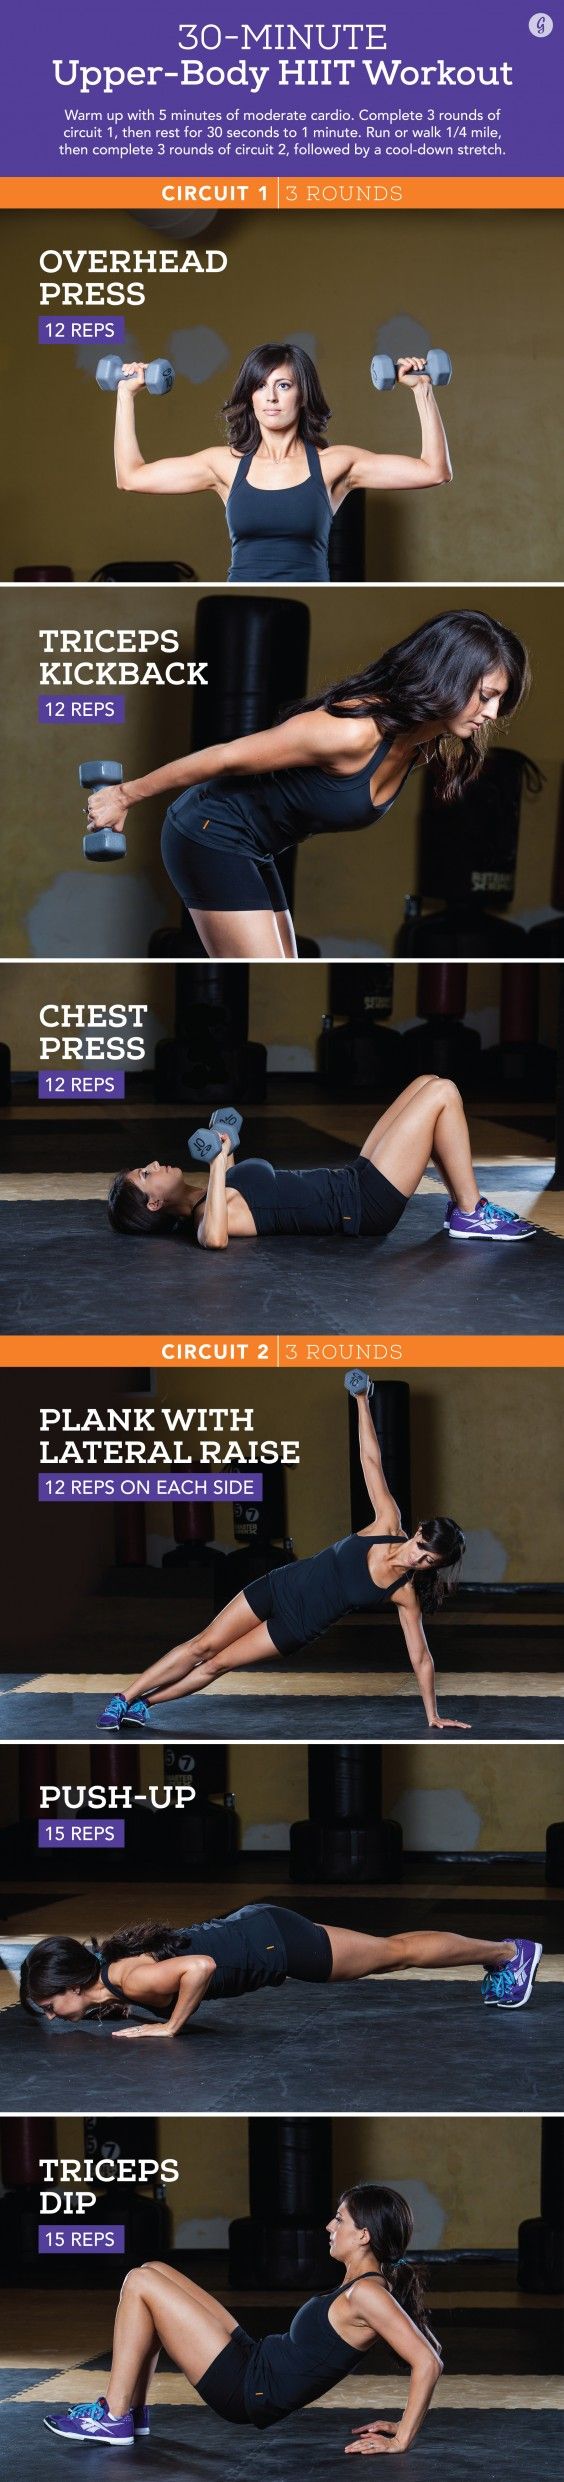 Upper-Body Workout for Women: 6 HIIT Exercises with Dumbbells